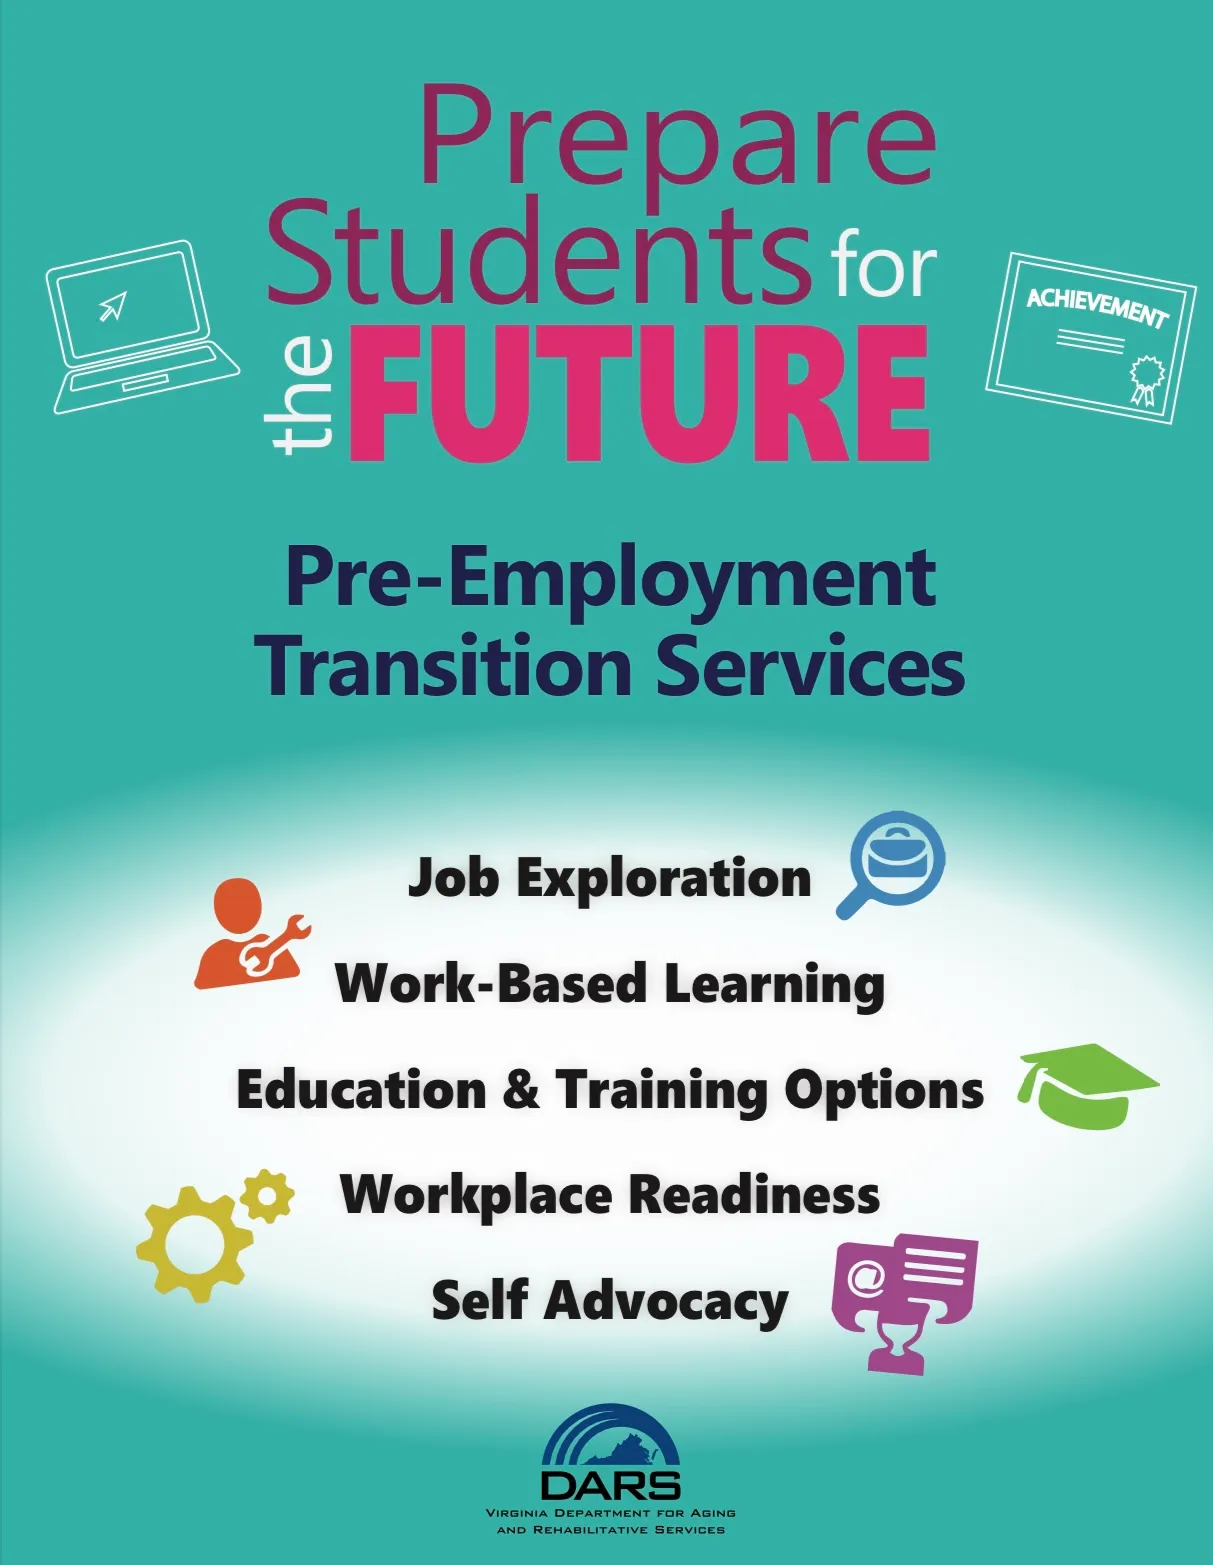 Prepare students for the future - Pre-Employment Transition Services: Job Exploration, Work-based learning, education and training options, workplace readiness, self advocacy